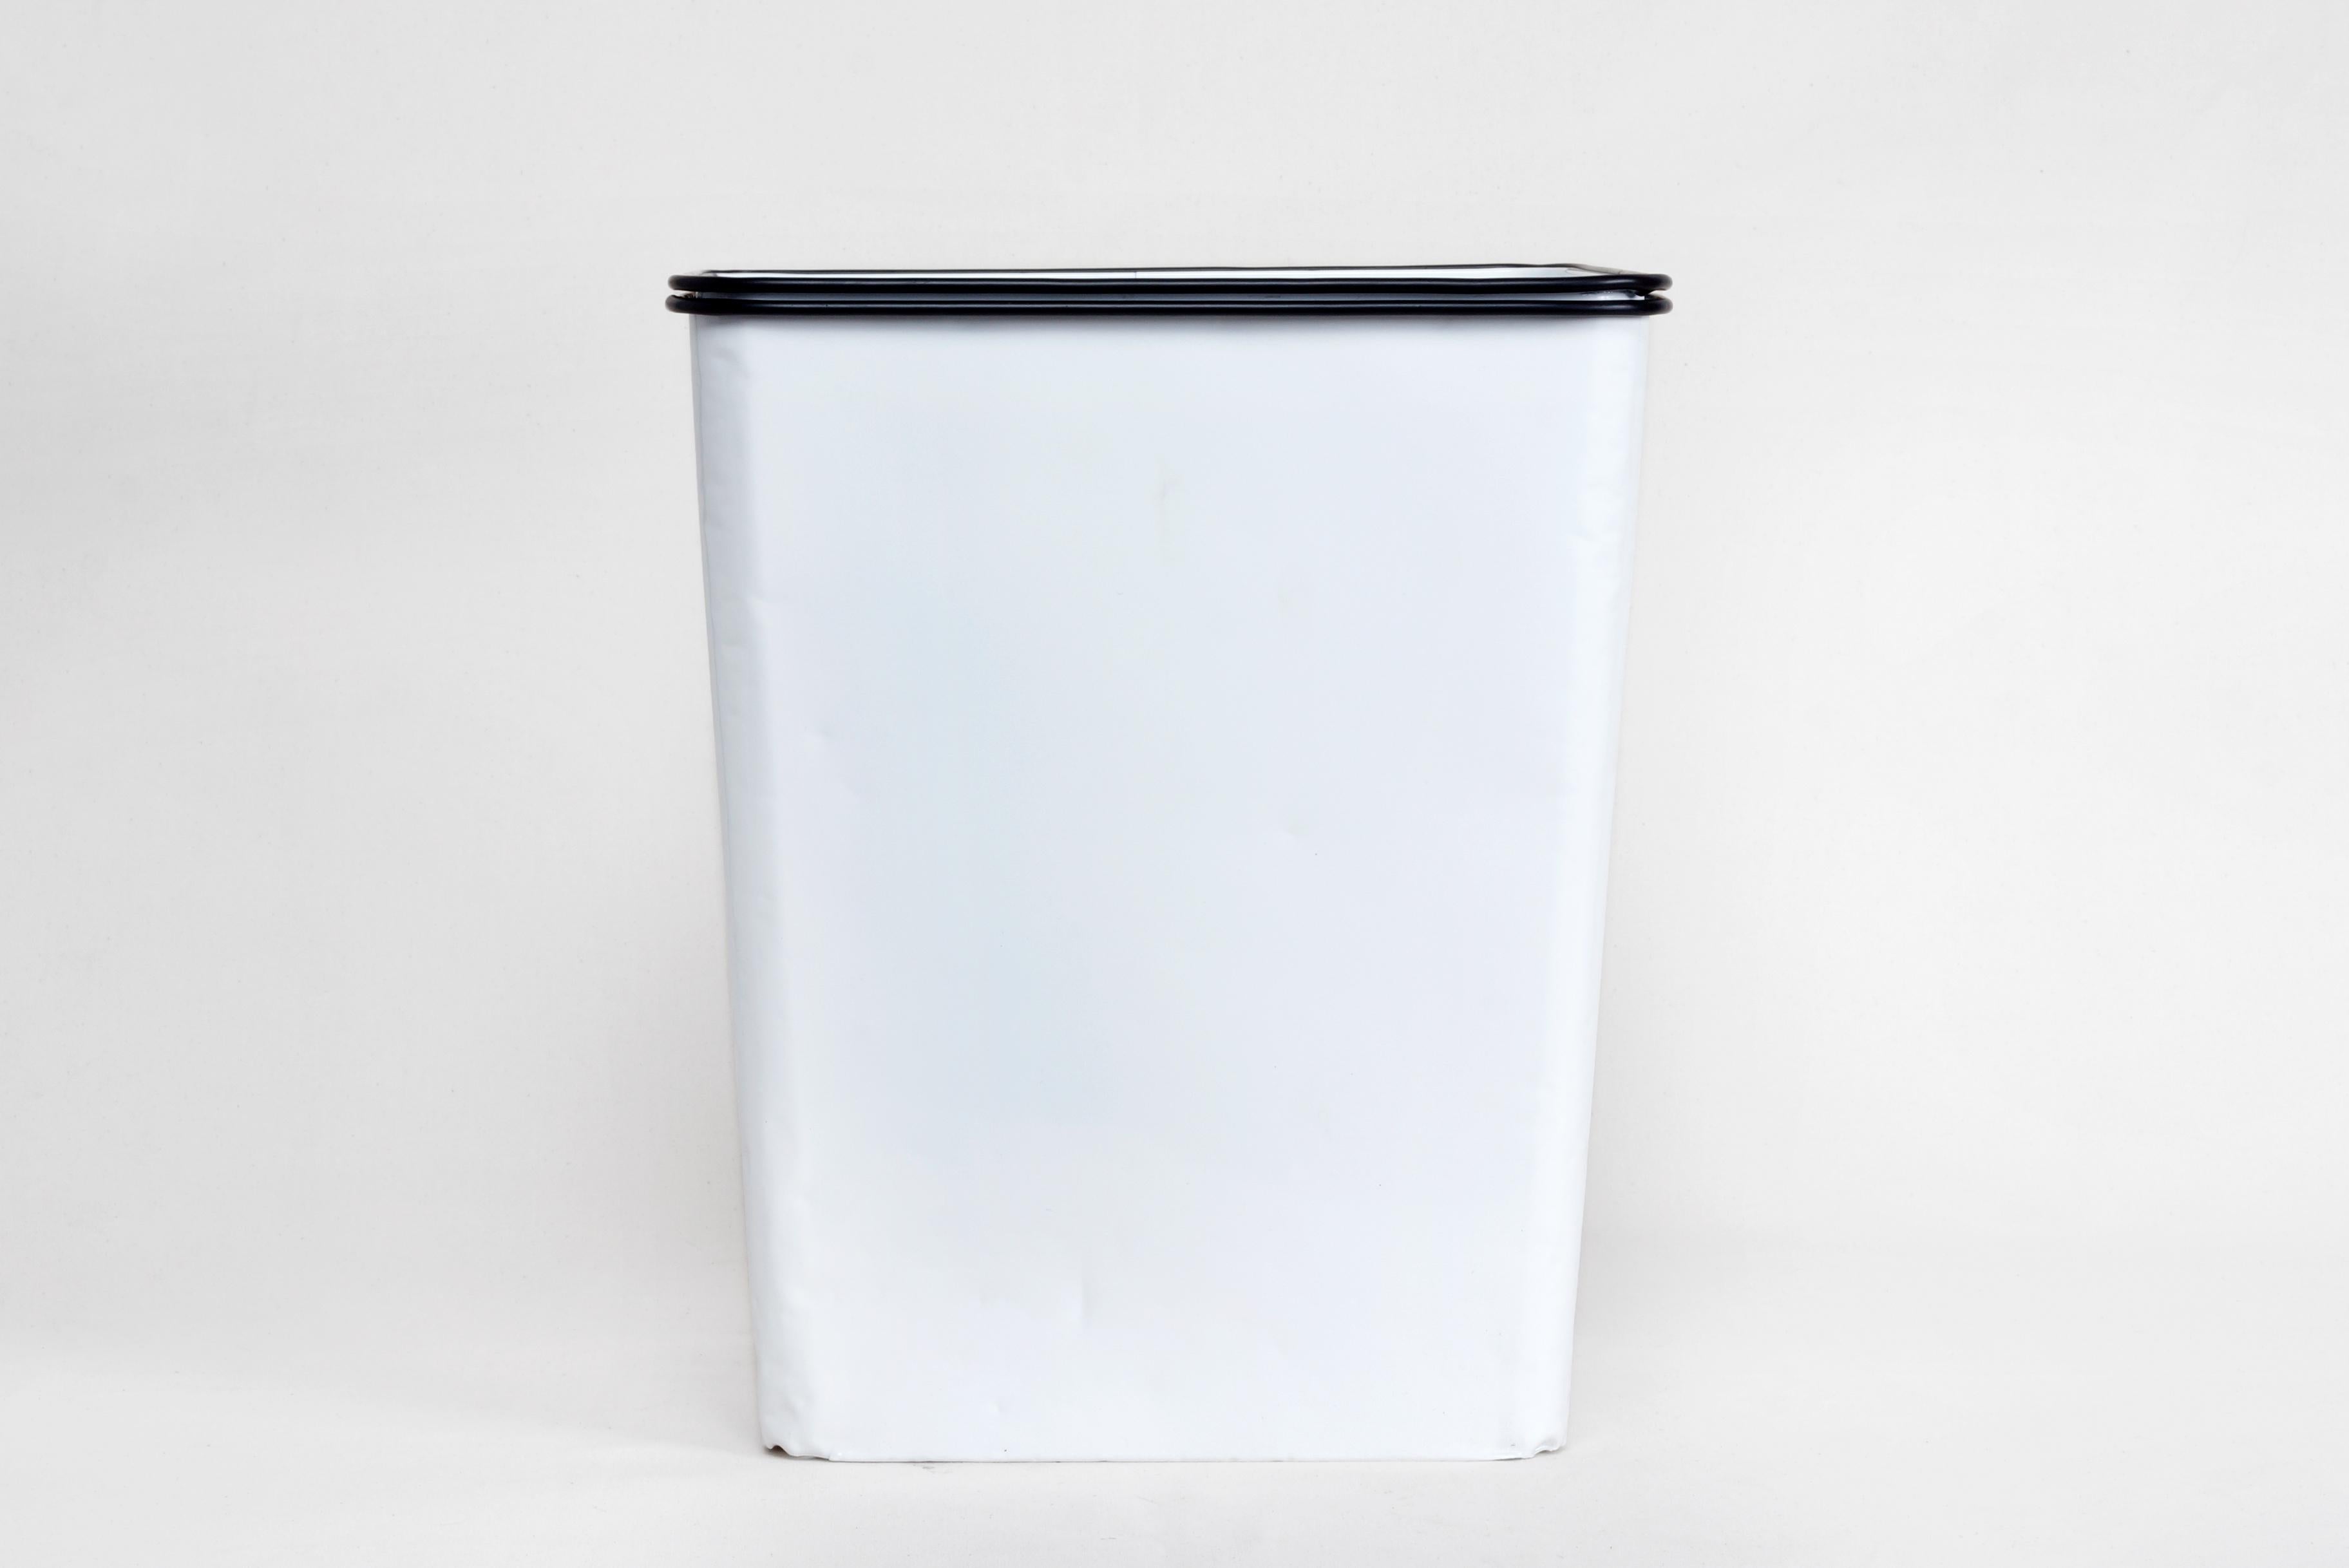 Machine Age 1940s Erie Art Metal Steel Trash Can Refinished in Gloss White